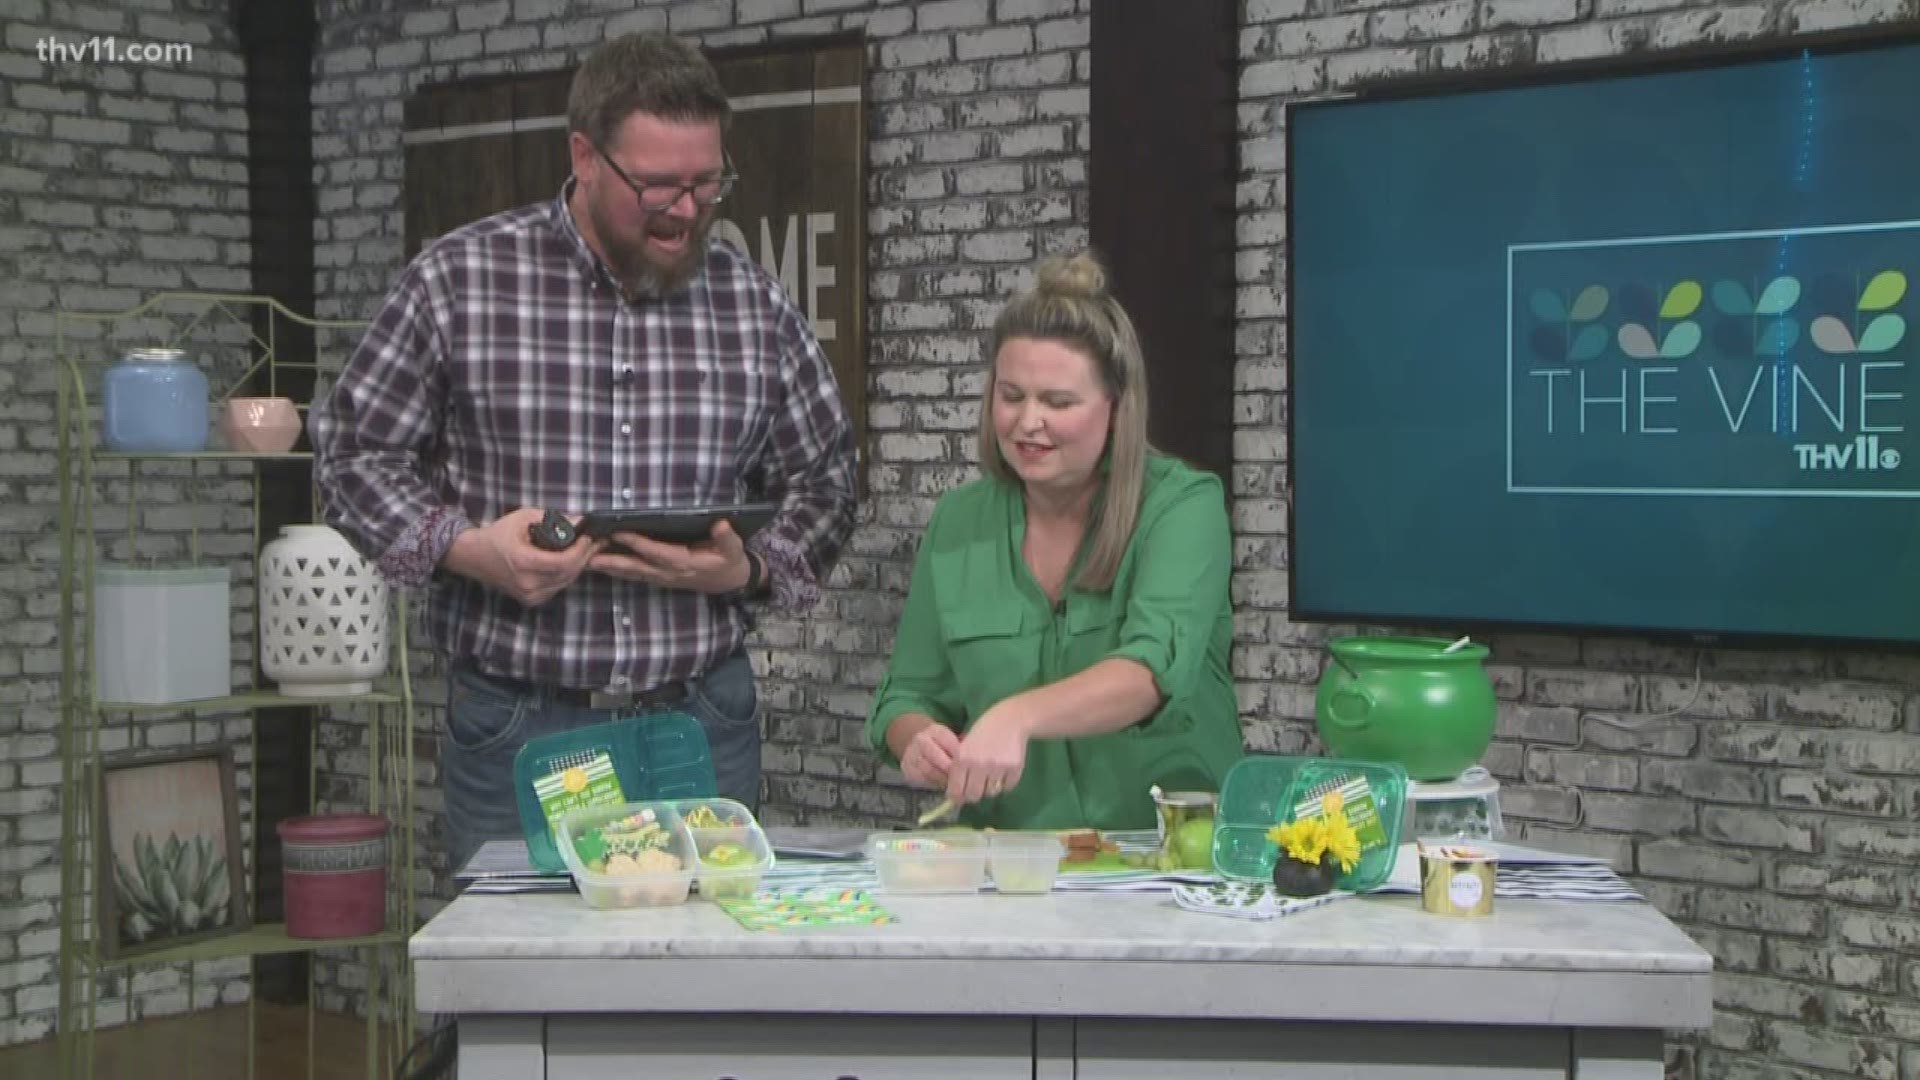 Krista Ryken of "K to Z Design" shared a fun idea for the kiddos this Saint Patrick's Day.!